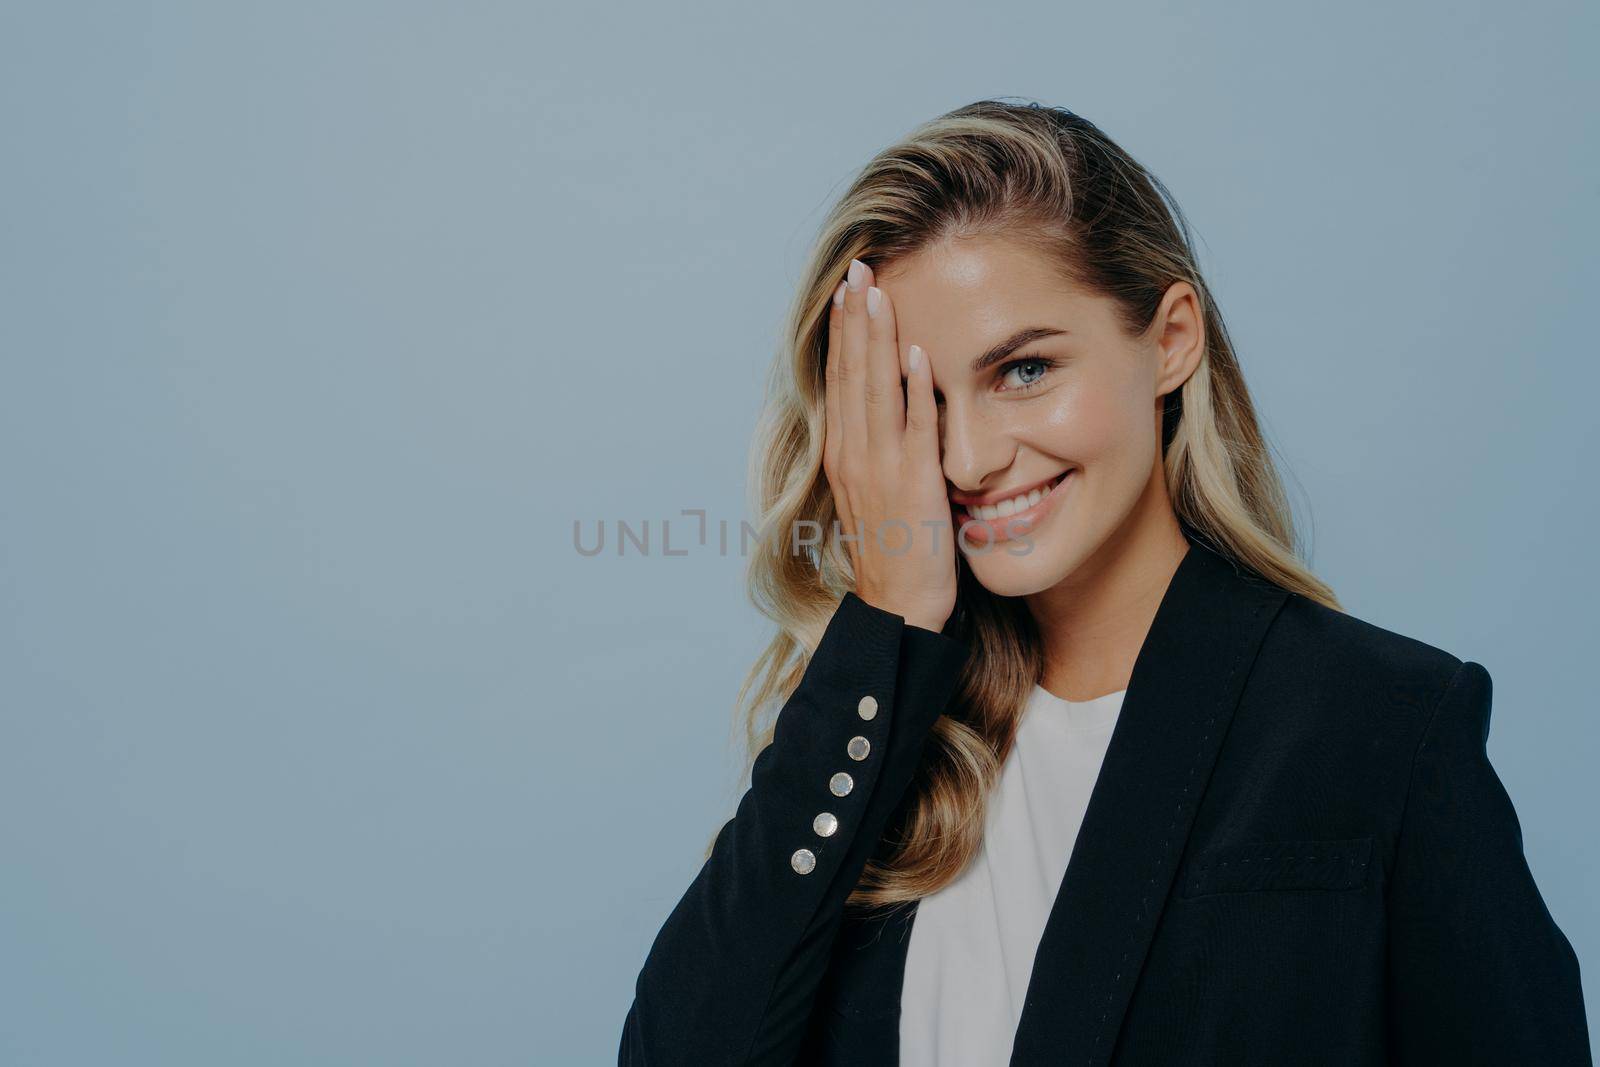 Blonde cute european woman in black coat covering half of her face with hand while smiling, expressing sadness with gesture, standing alone in front of blue background. Shy face expression concept